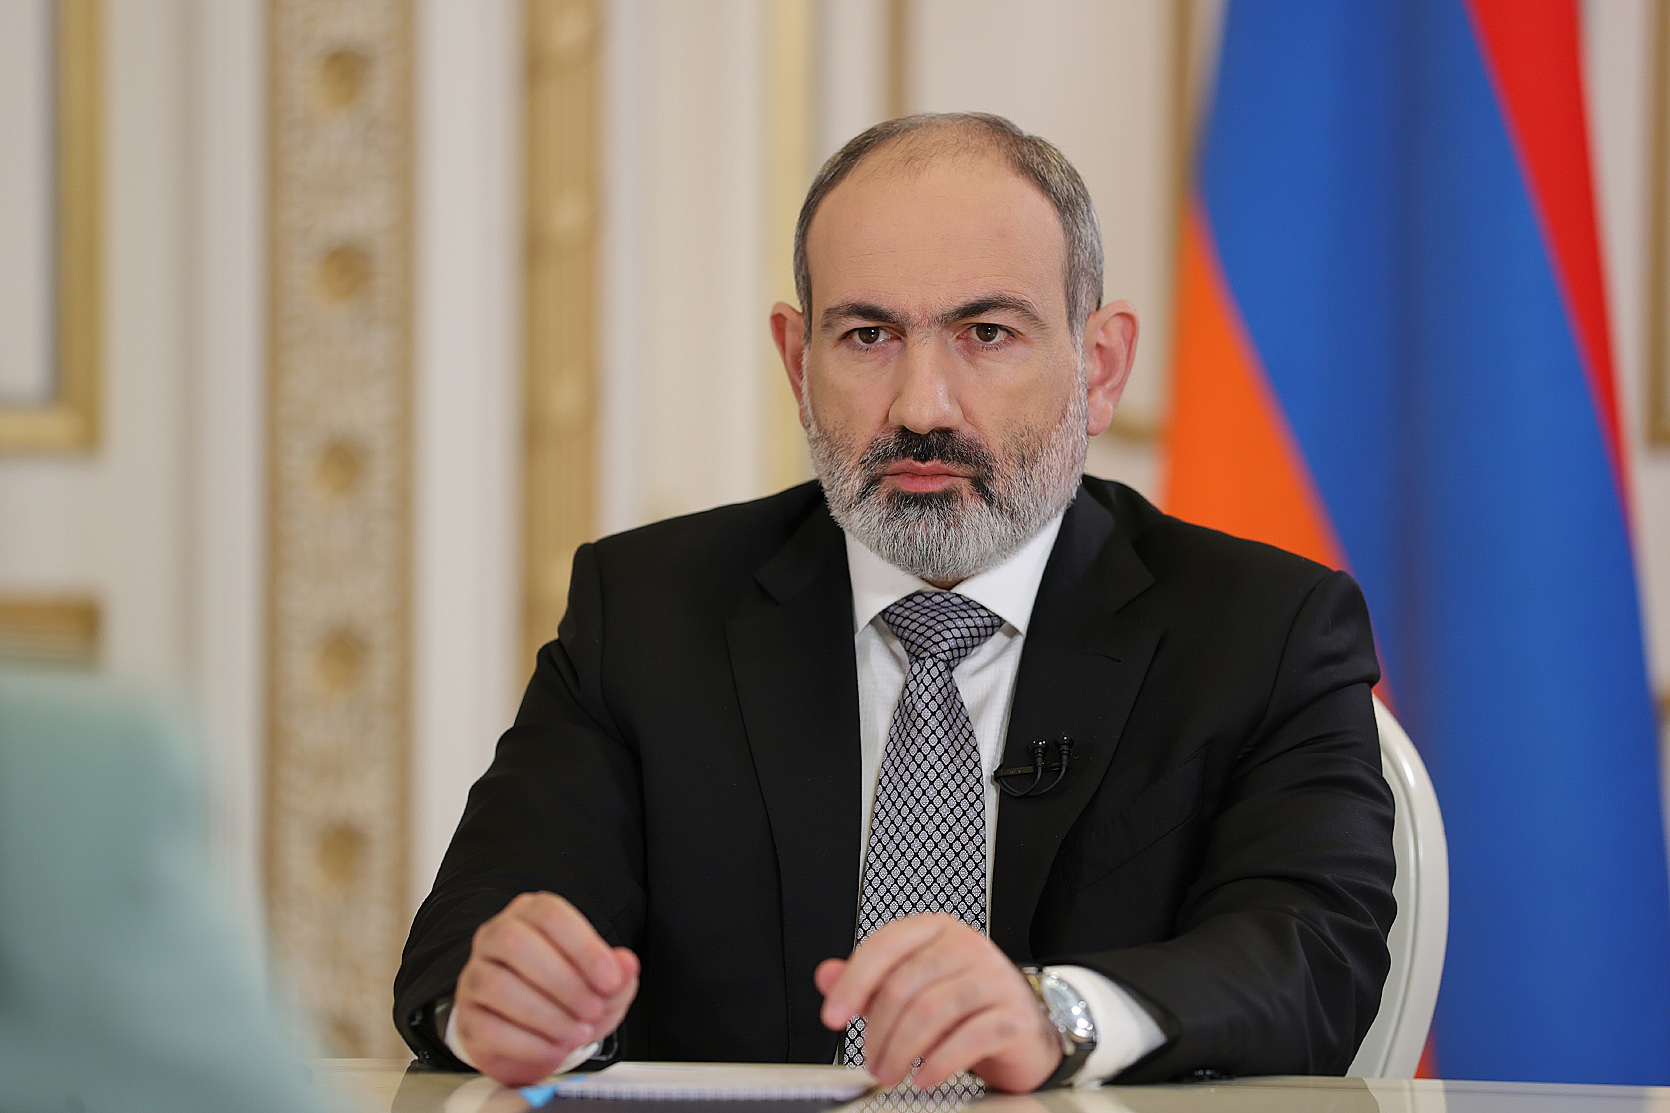 Pashinyan answered questions from journalists